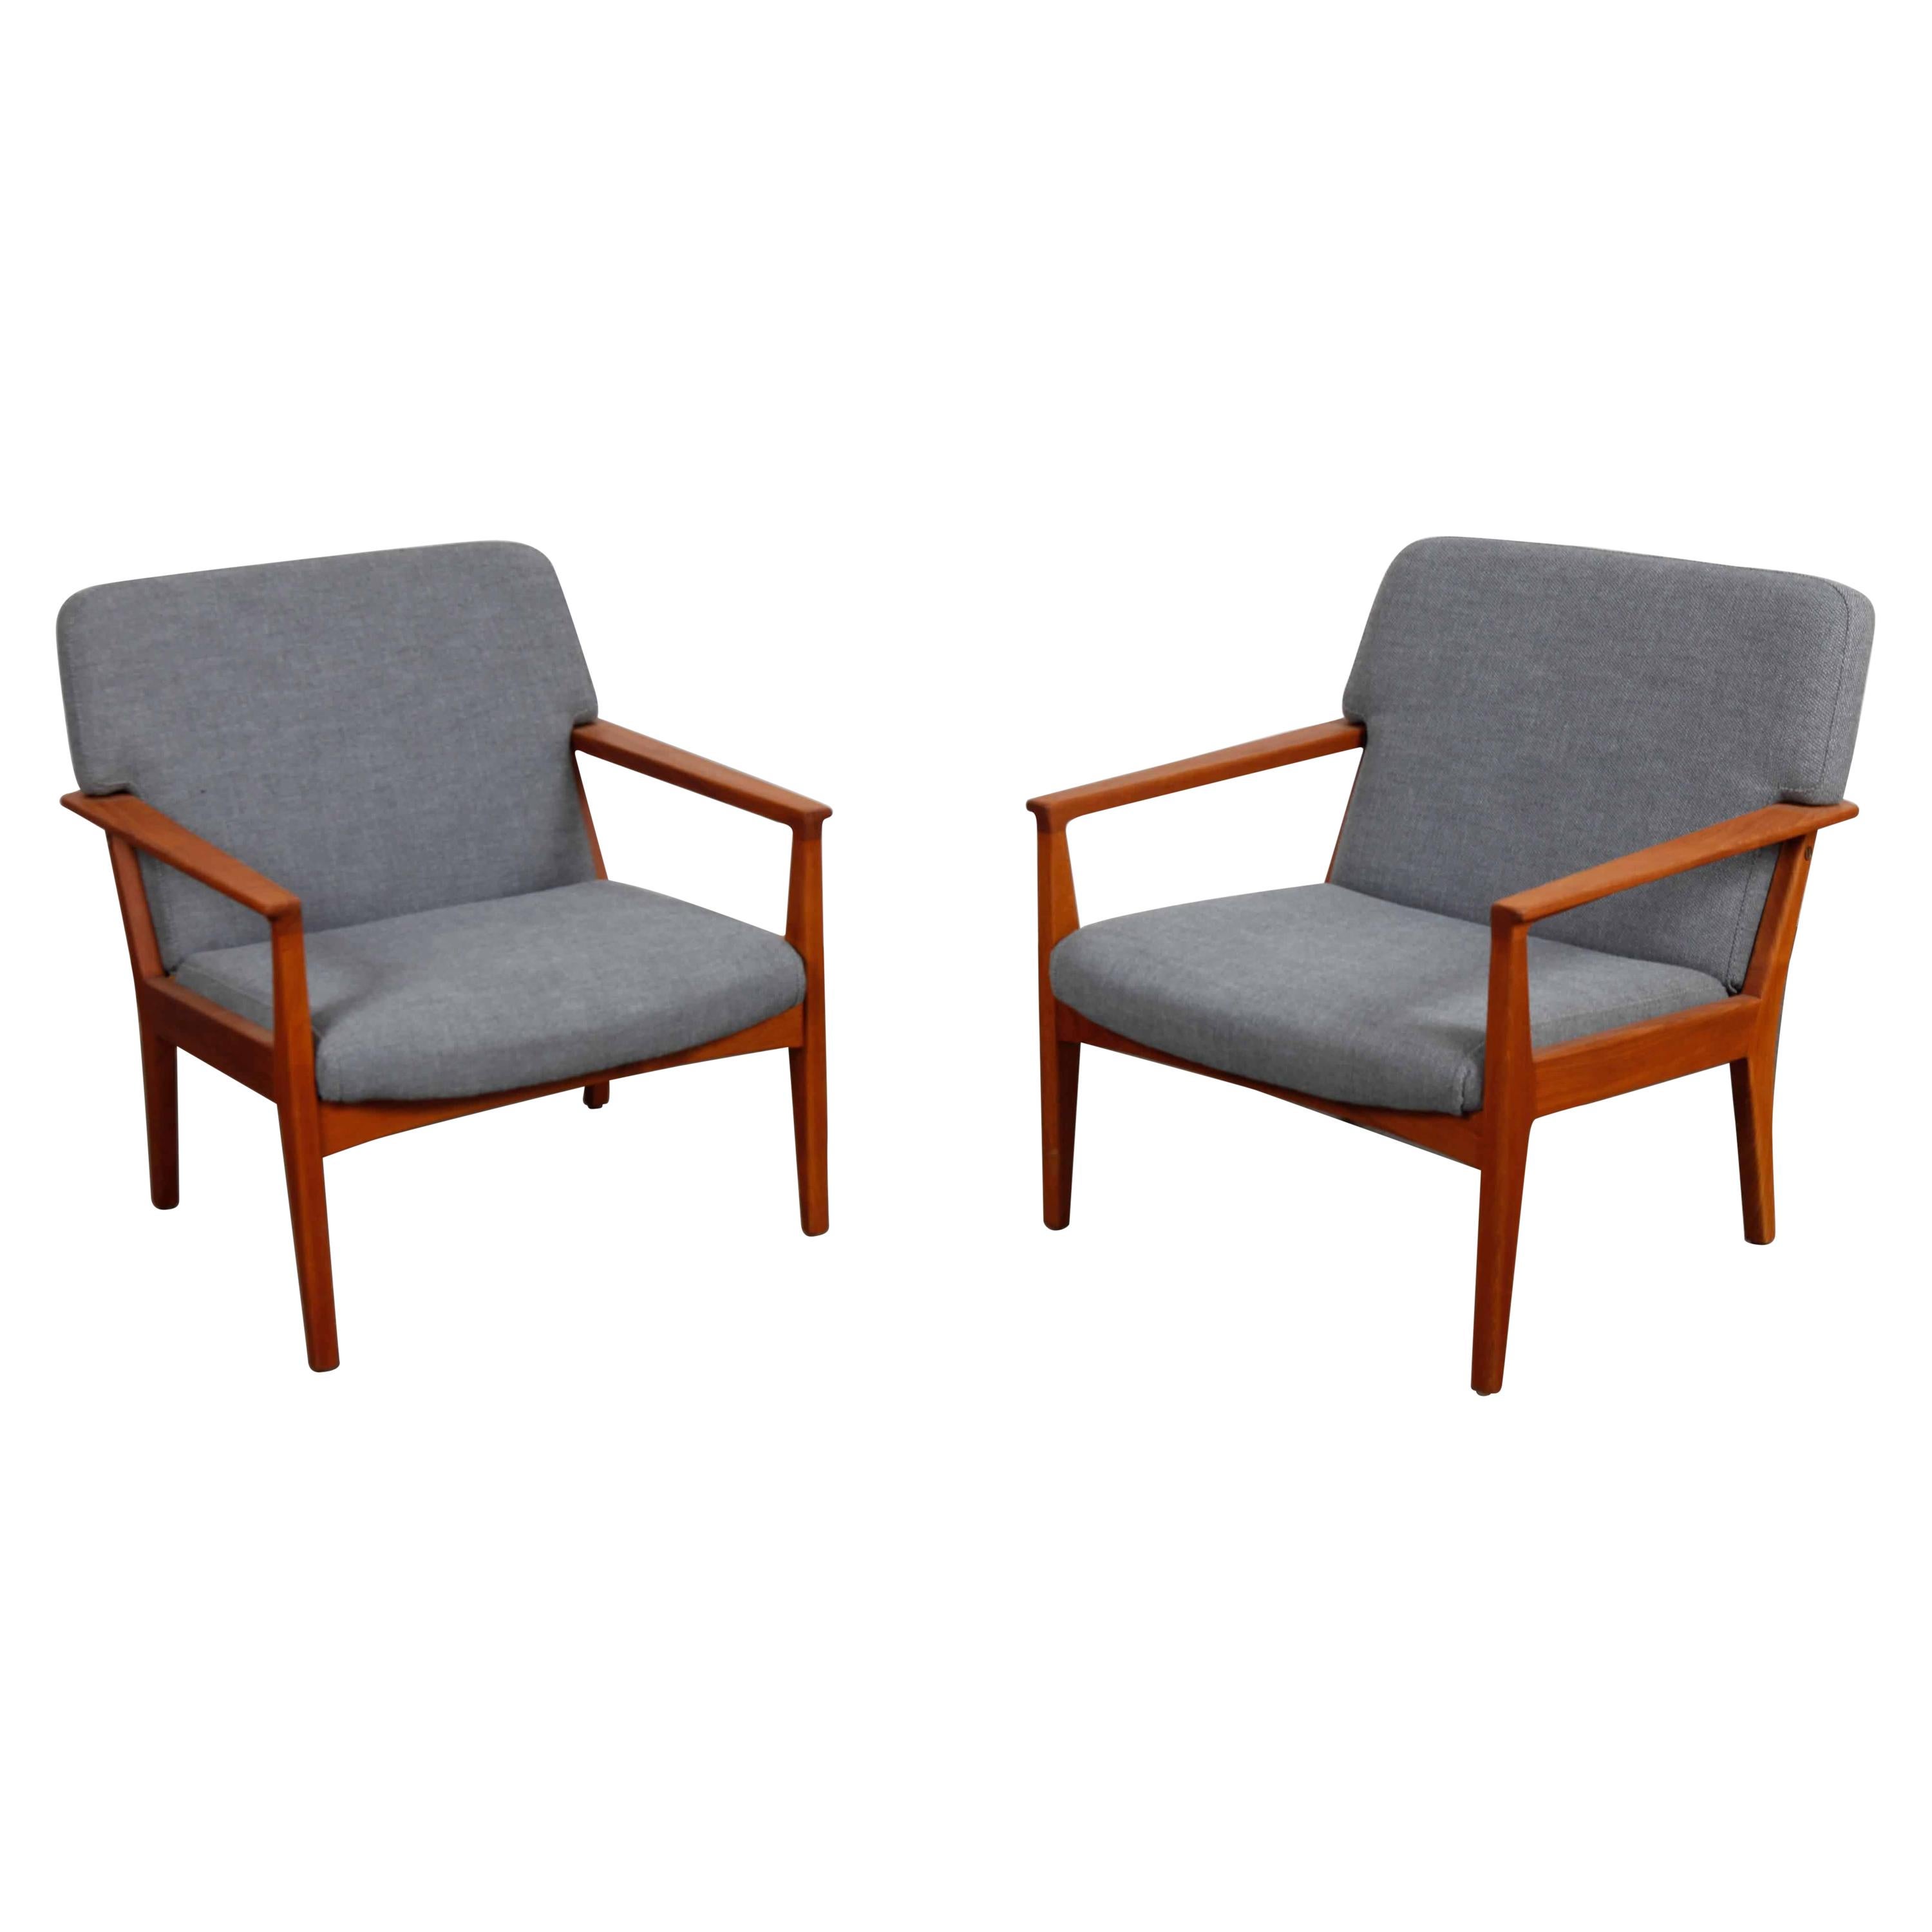 Pair of Swedish Teak 1960s Lounge Chairs Newly Refinished and Reupholstered